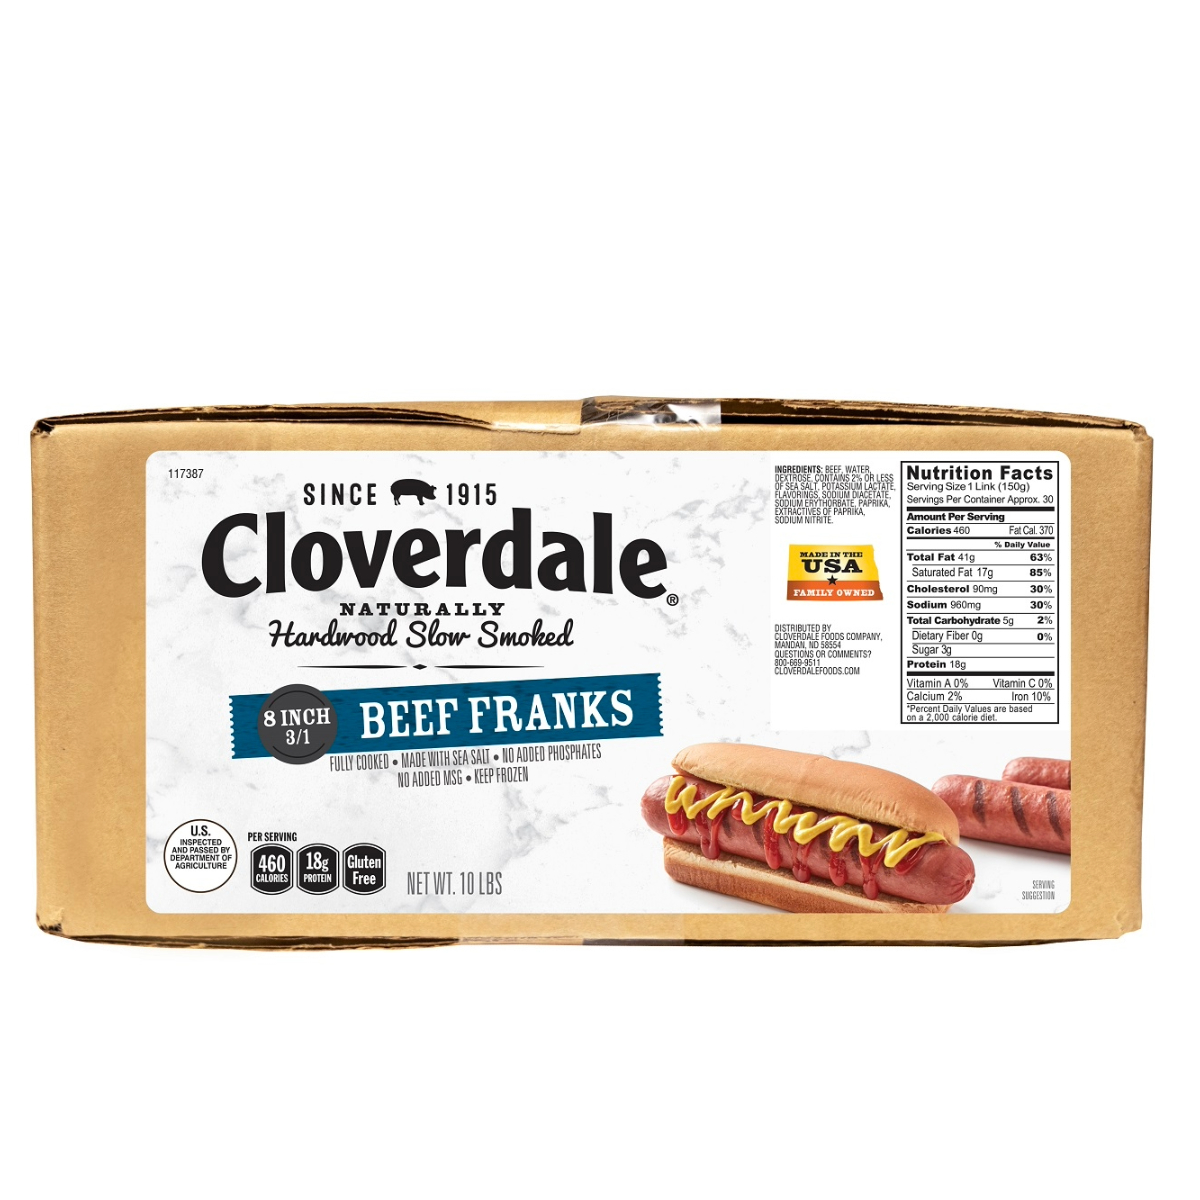 CLOVERDALE BEEF HOT DOGS 8 INCH 3/1 FRANKS CHICAGO